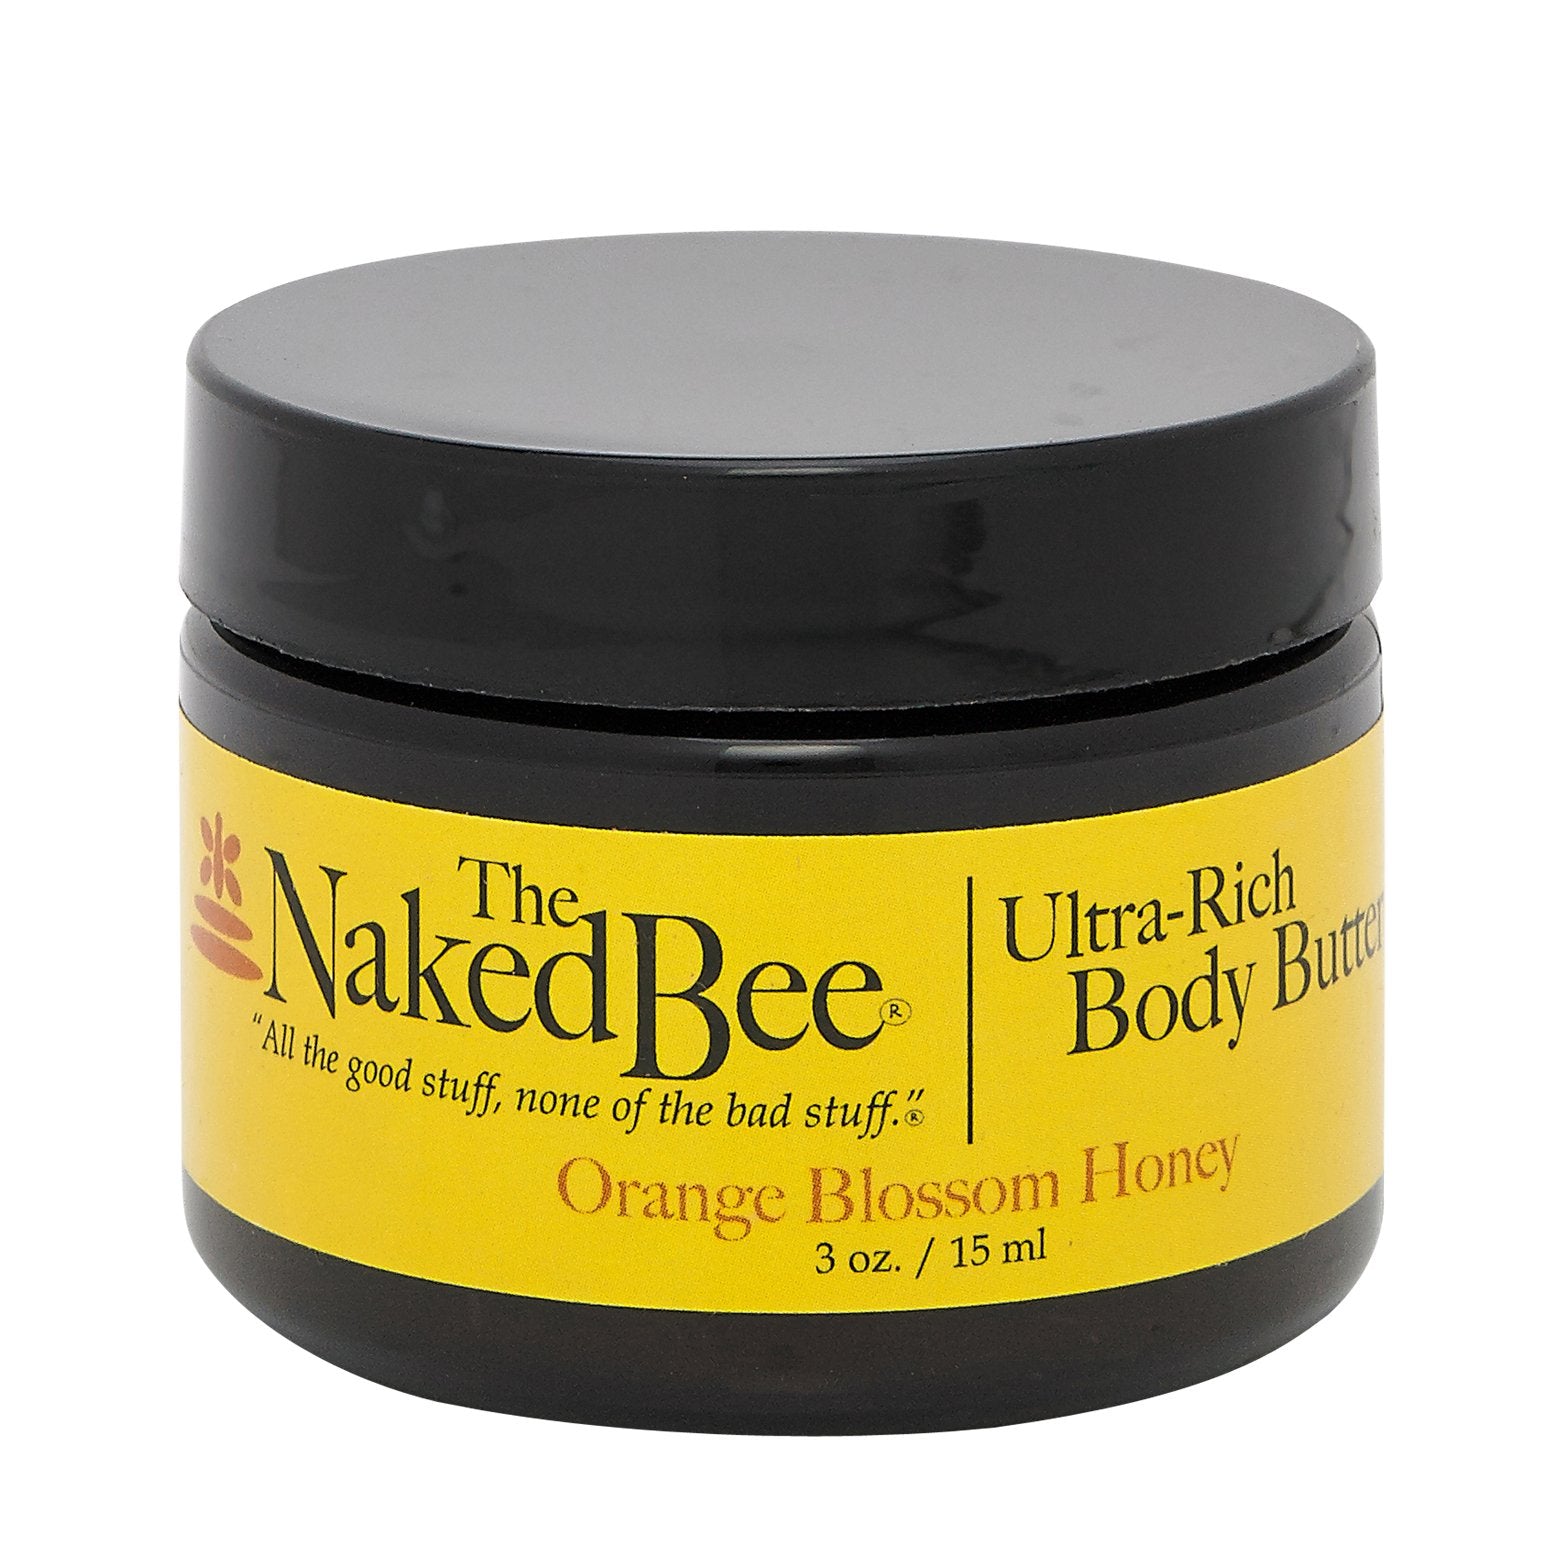 Naked Bee Ultra-Rich Body Butter - Pharm Favorites by Economy Pharmacy